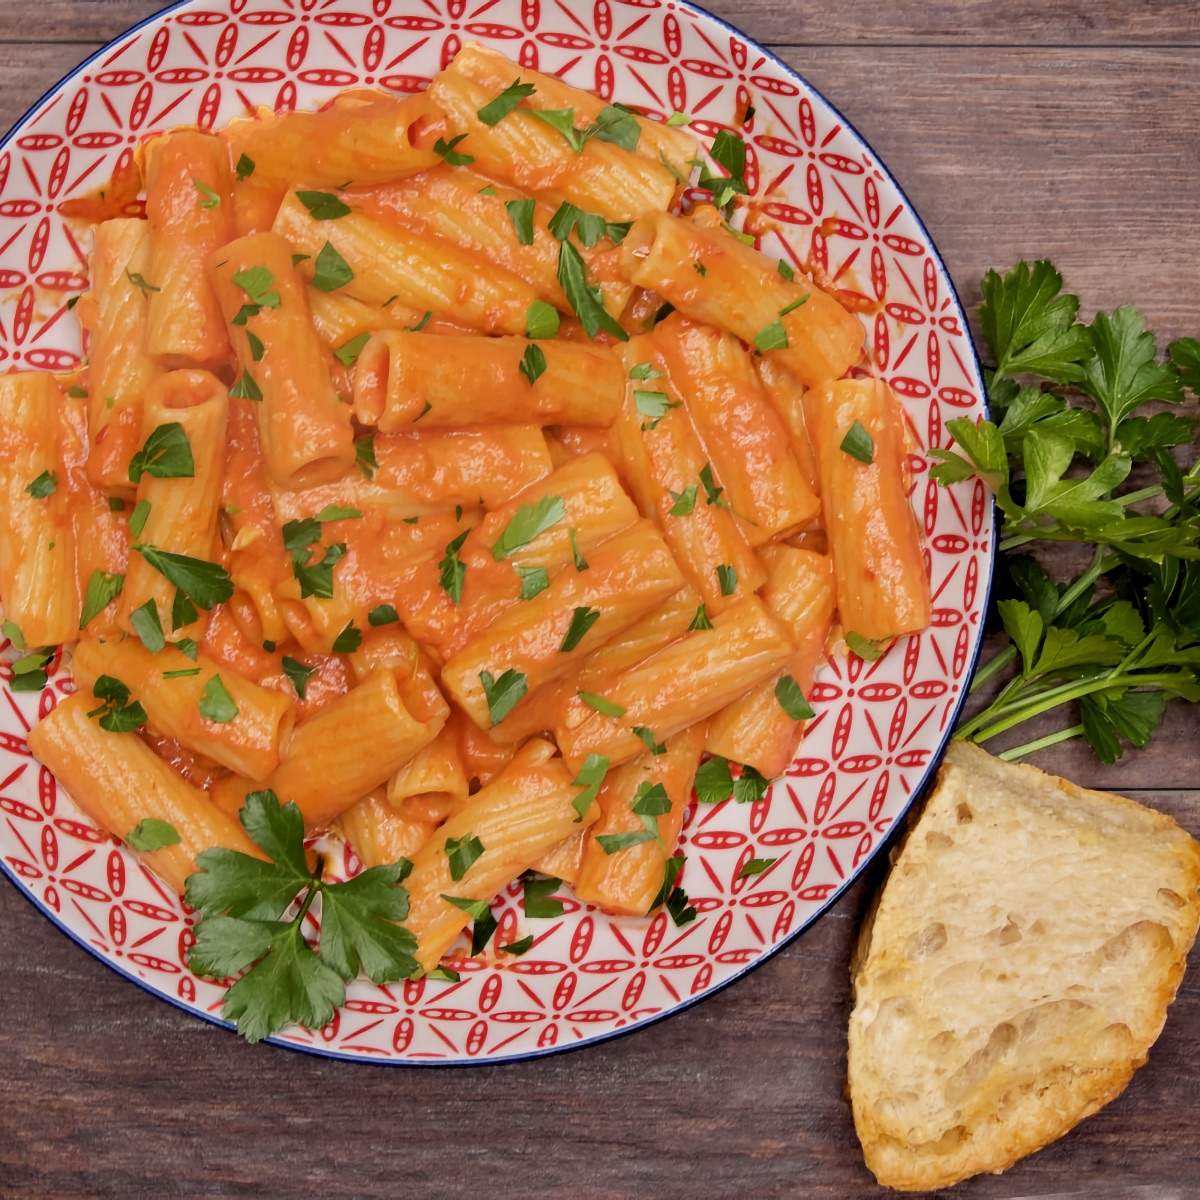 A serving of pasta alla vodka, sprinkled with chopped parsley and served with a slice of homemade rustic bread.